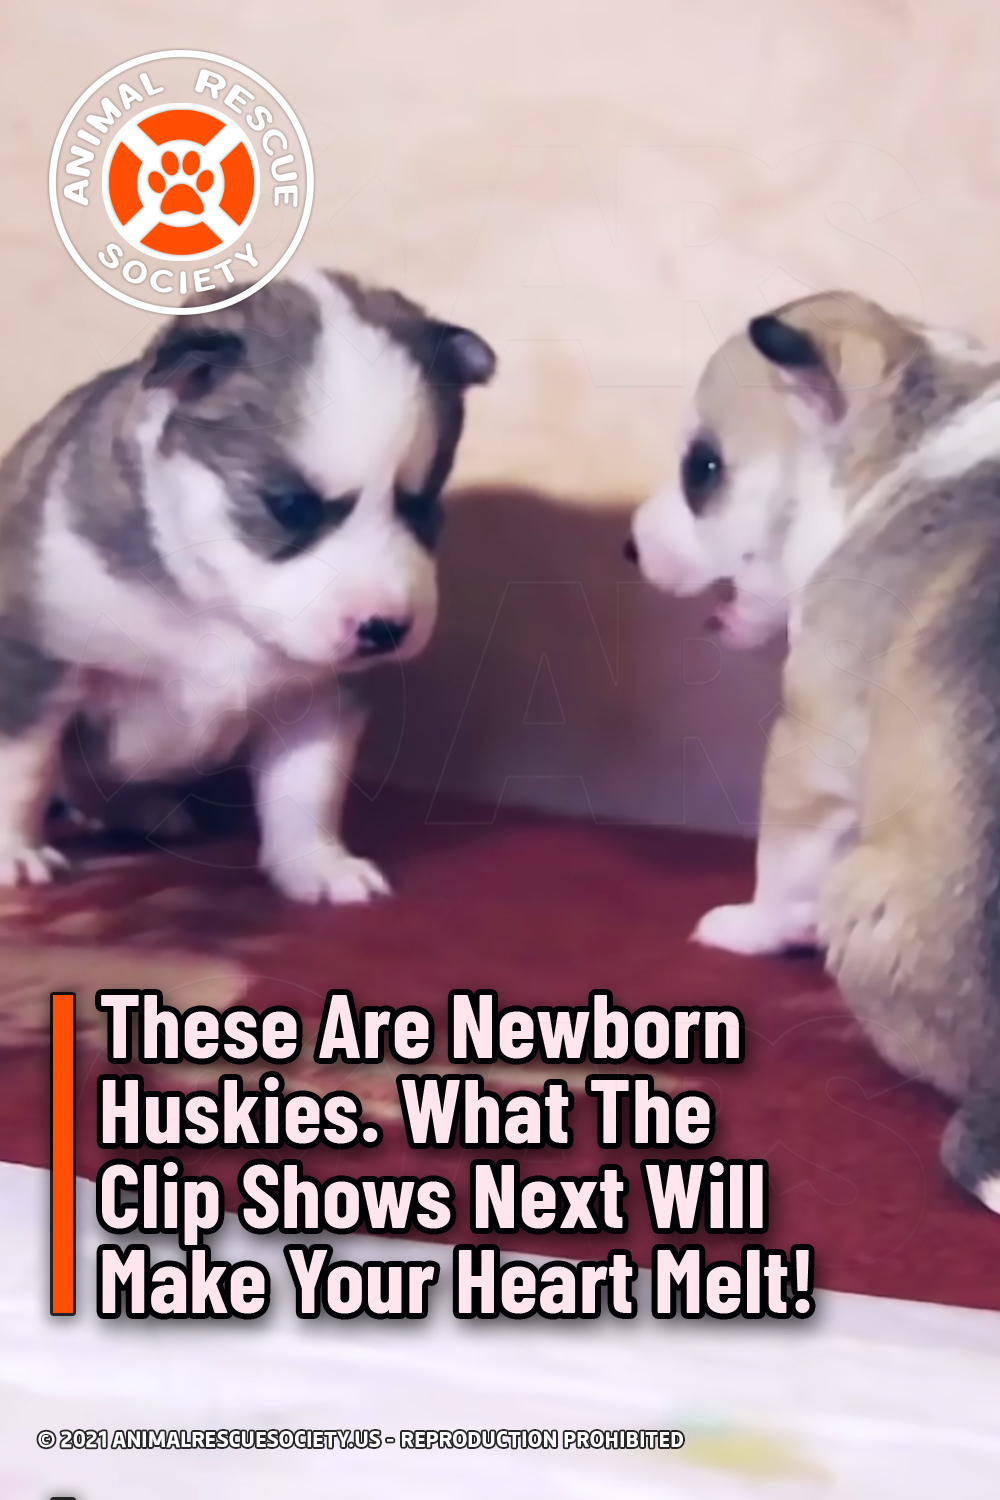 These Are Newborn Huskies. What The Clip Shows Next Will Make Your Heart Melt!